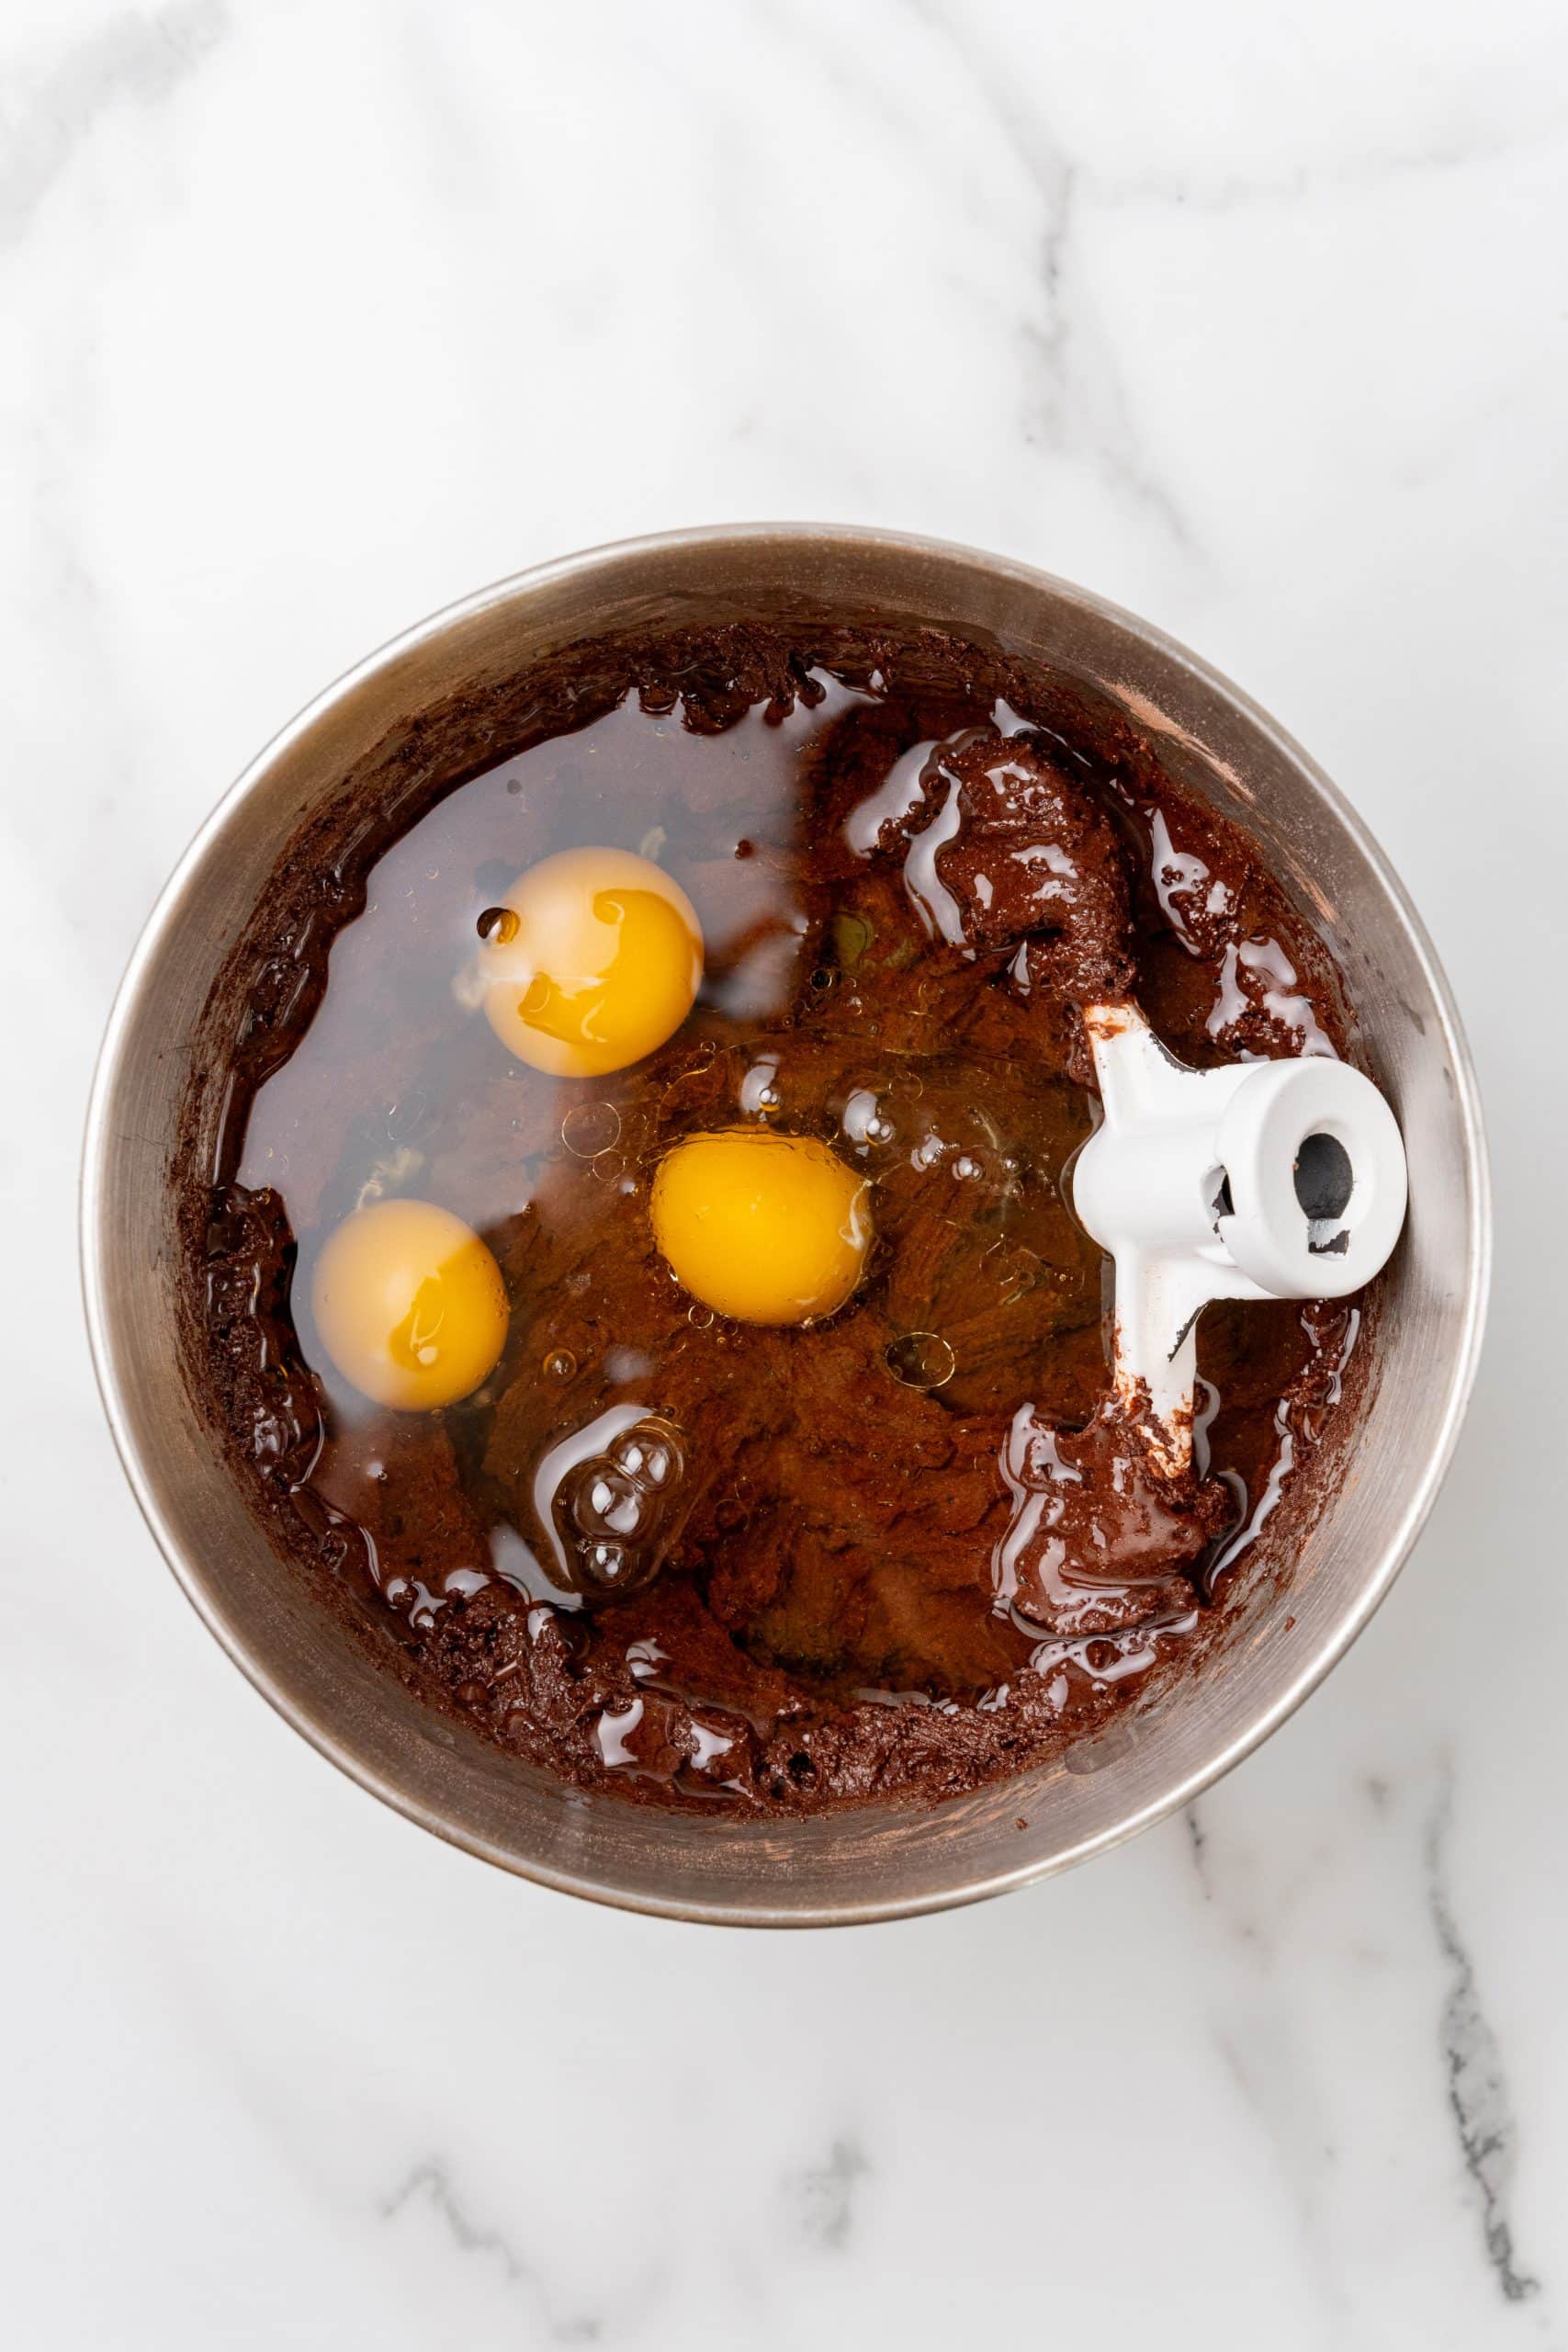 eggs and oil in a metal mixing bowl with chocolate cake batter